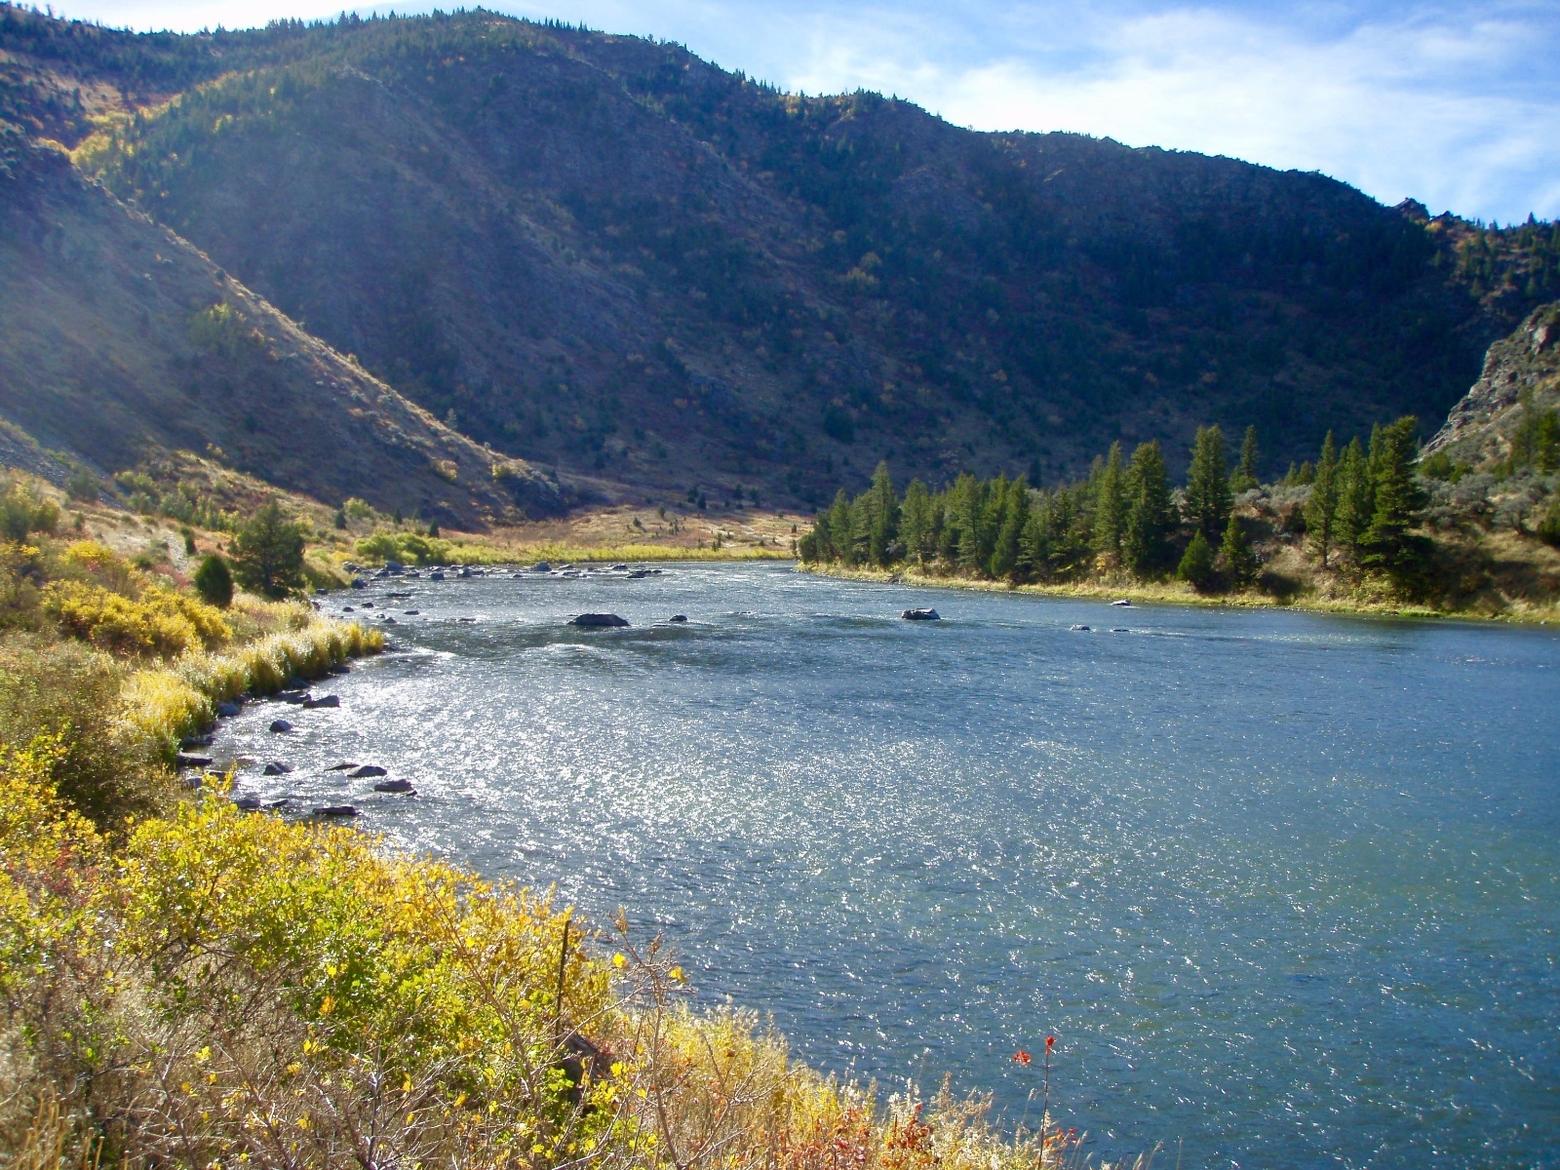 Beartrap Canyon Wilderness, located west of Bozeman along the Madison River, is one of four different units that comprise the Lee Metcalf Wilderness complex named in the legislator's honor. Beartrap is managed by the Bureau of Land Management.  Photo courtesy Wikipedia Commons.